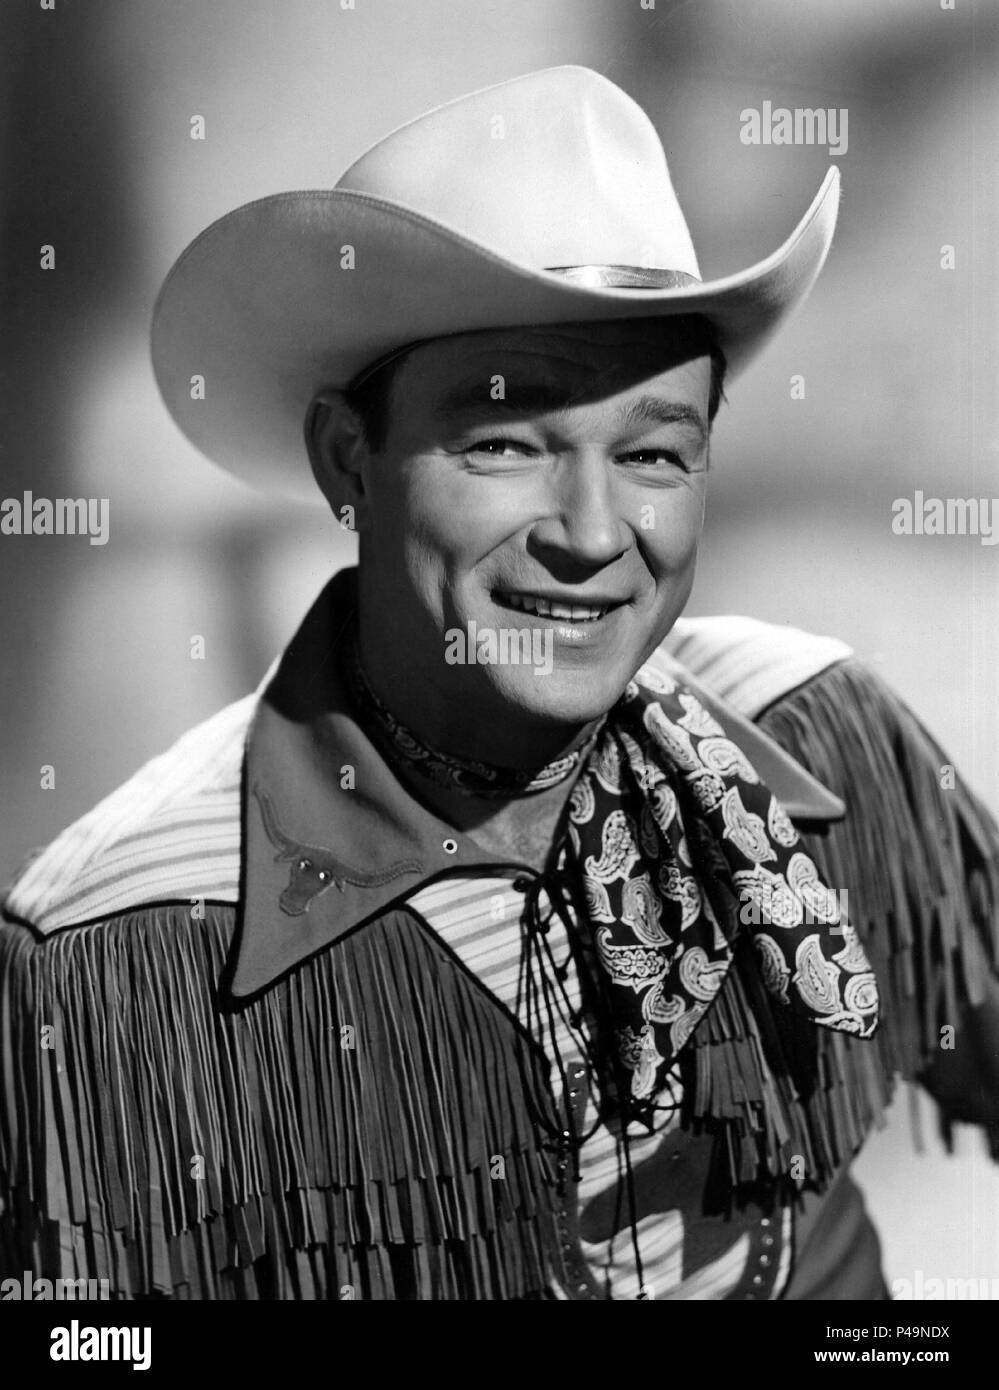 Roy rogers Black and White Stock Photos & Images - Alamy